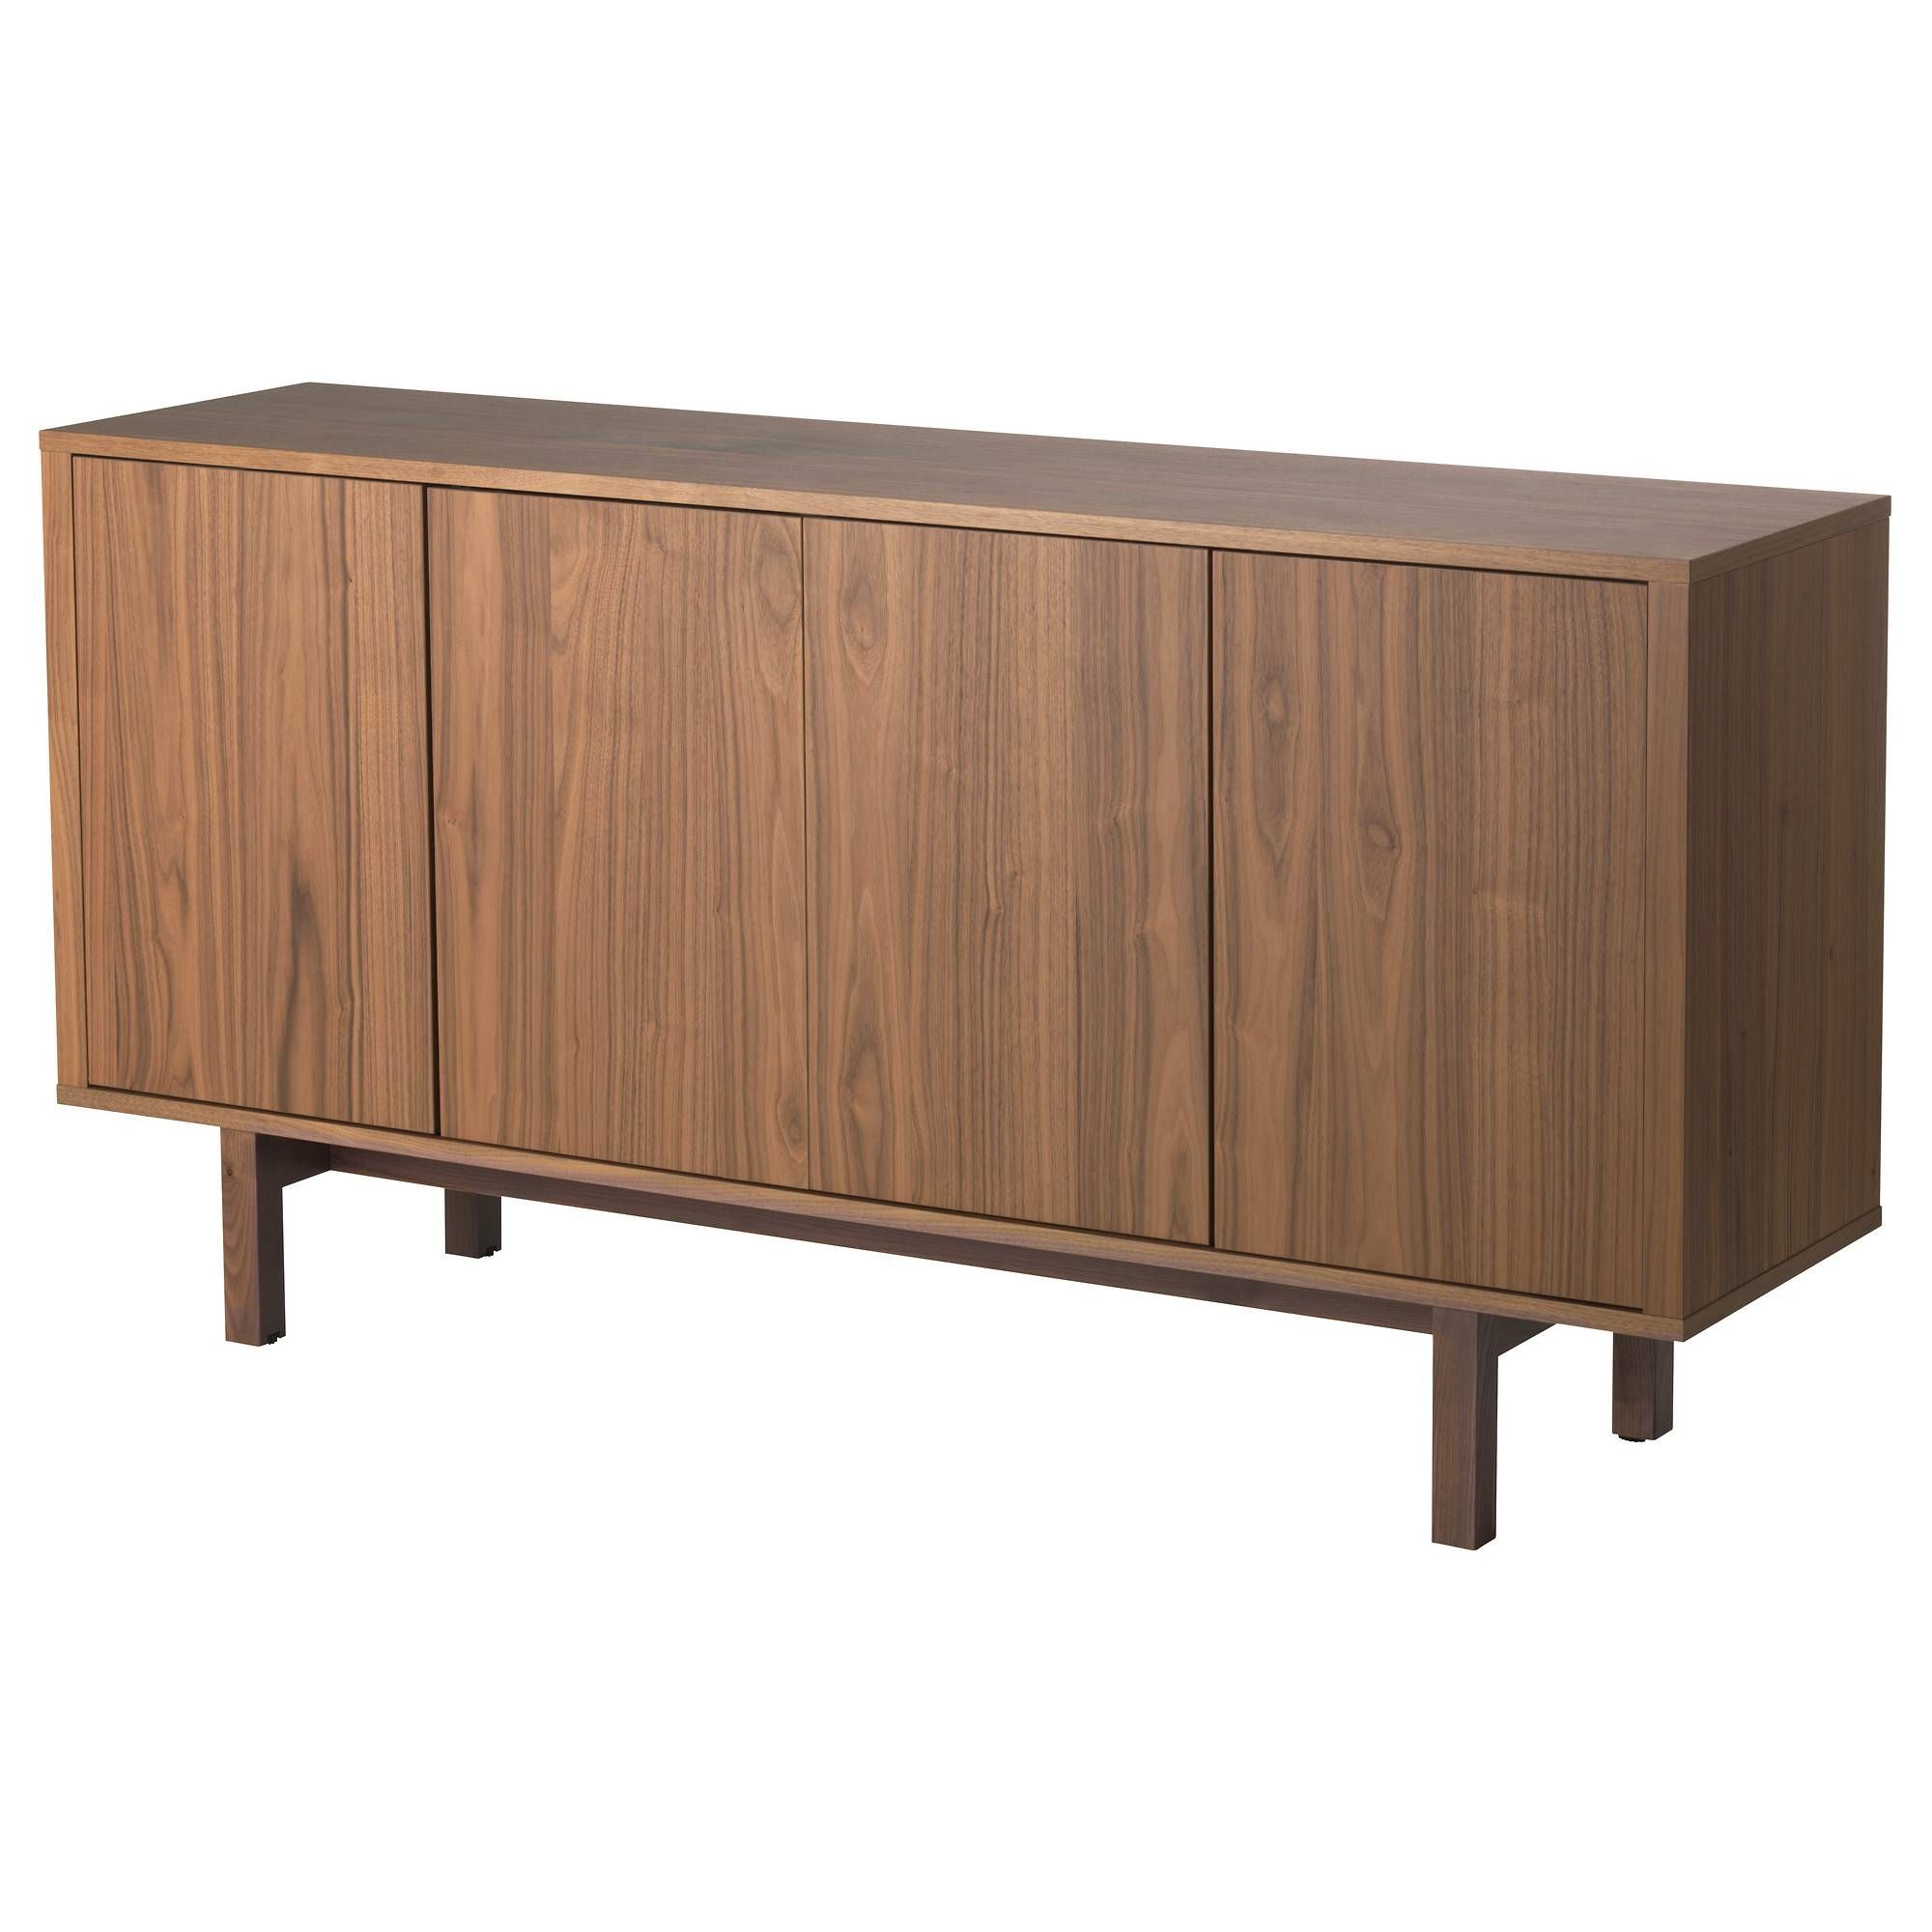 Buffet Tables & Sideboards – Ikea In Walnut And Black Sideboards (View 10 of 15)